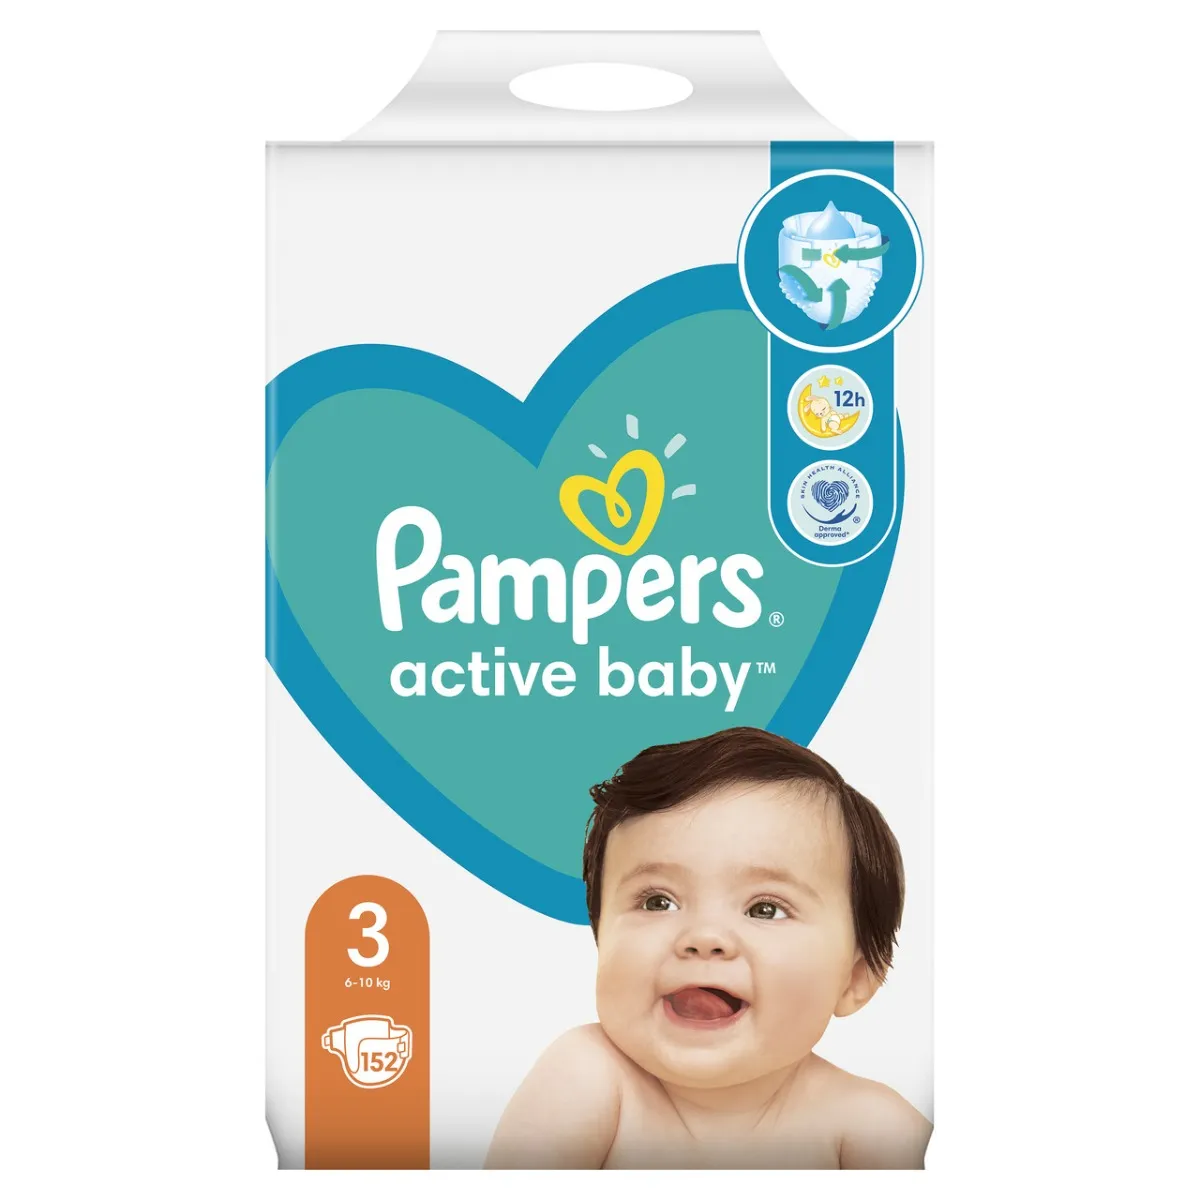 baby cruiser pampers